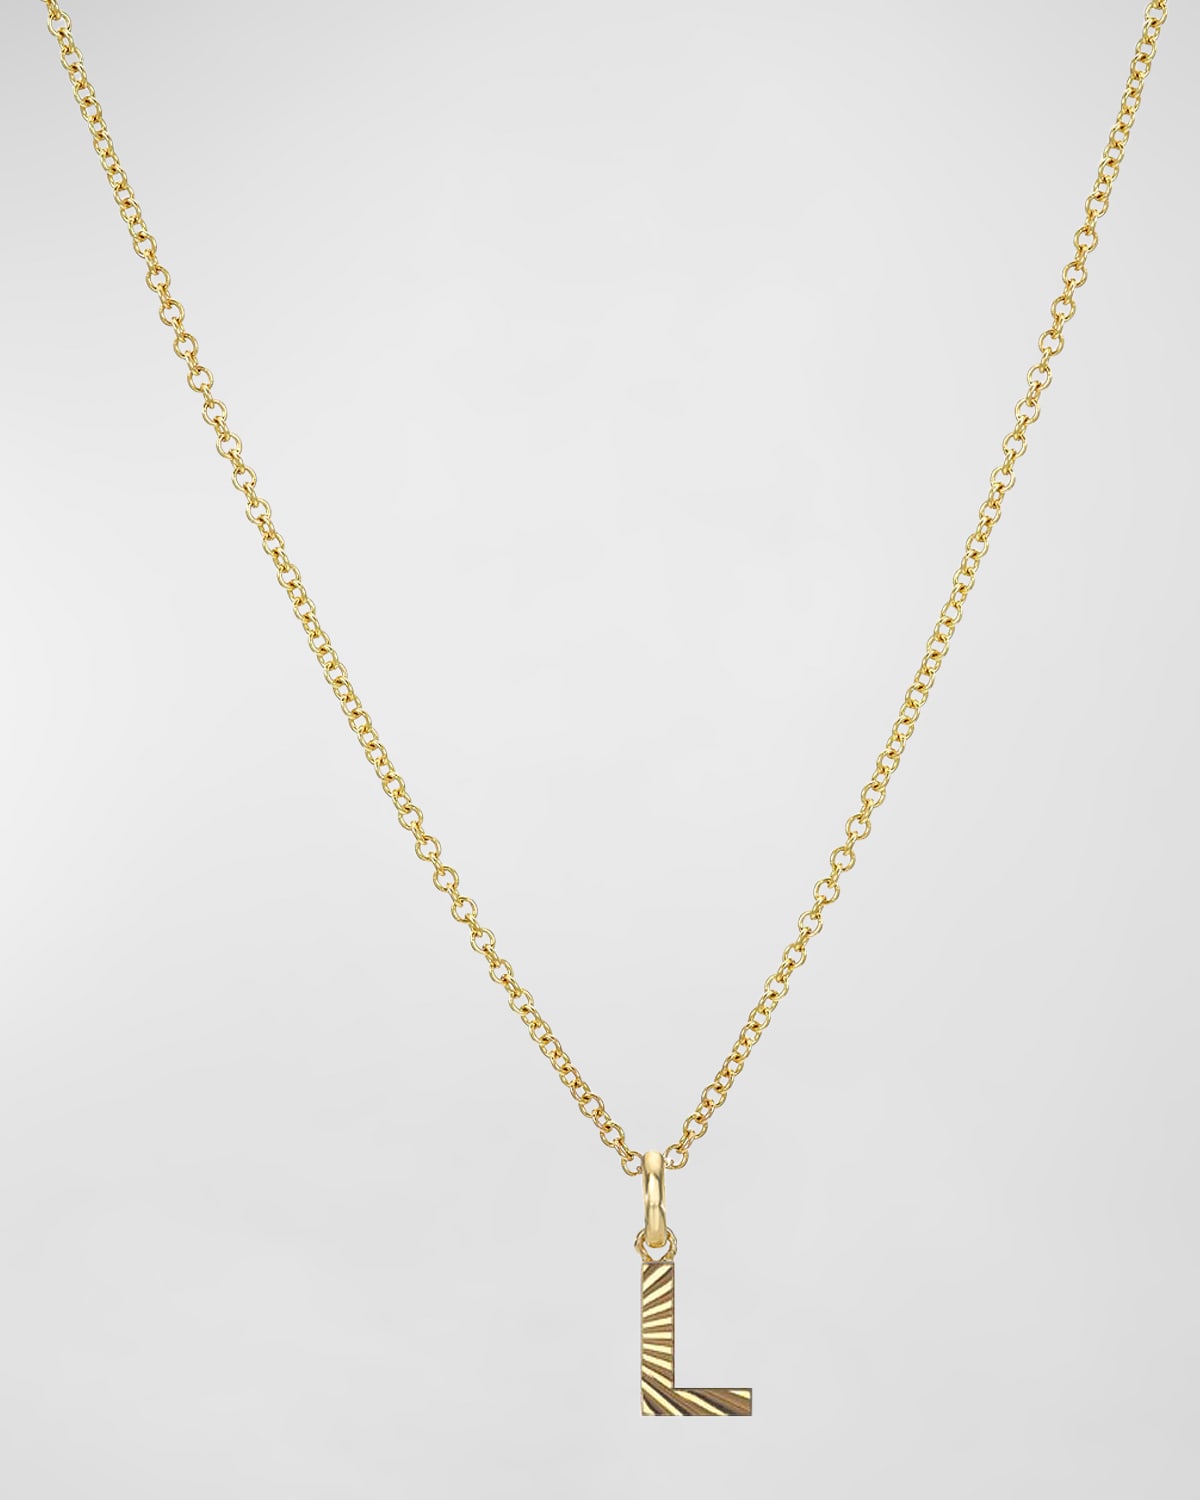 Zoe Lev Jewelry 14k Gold Initial Pendant Necklace In L